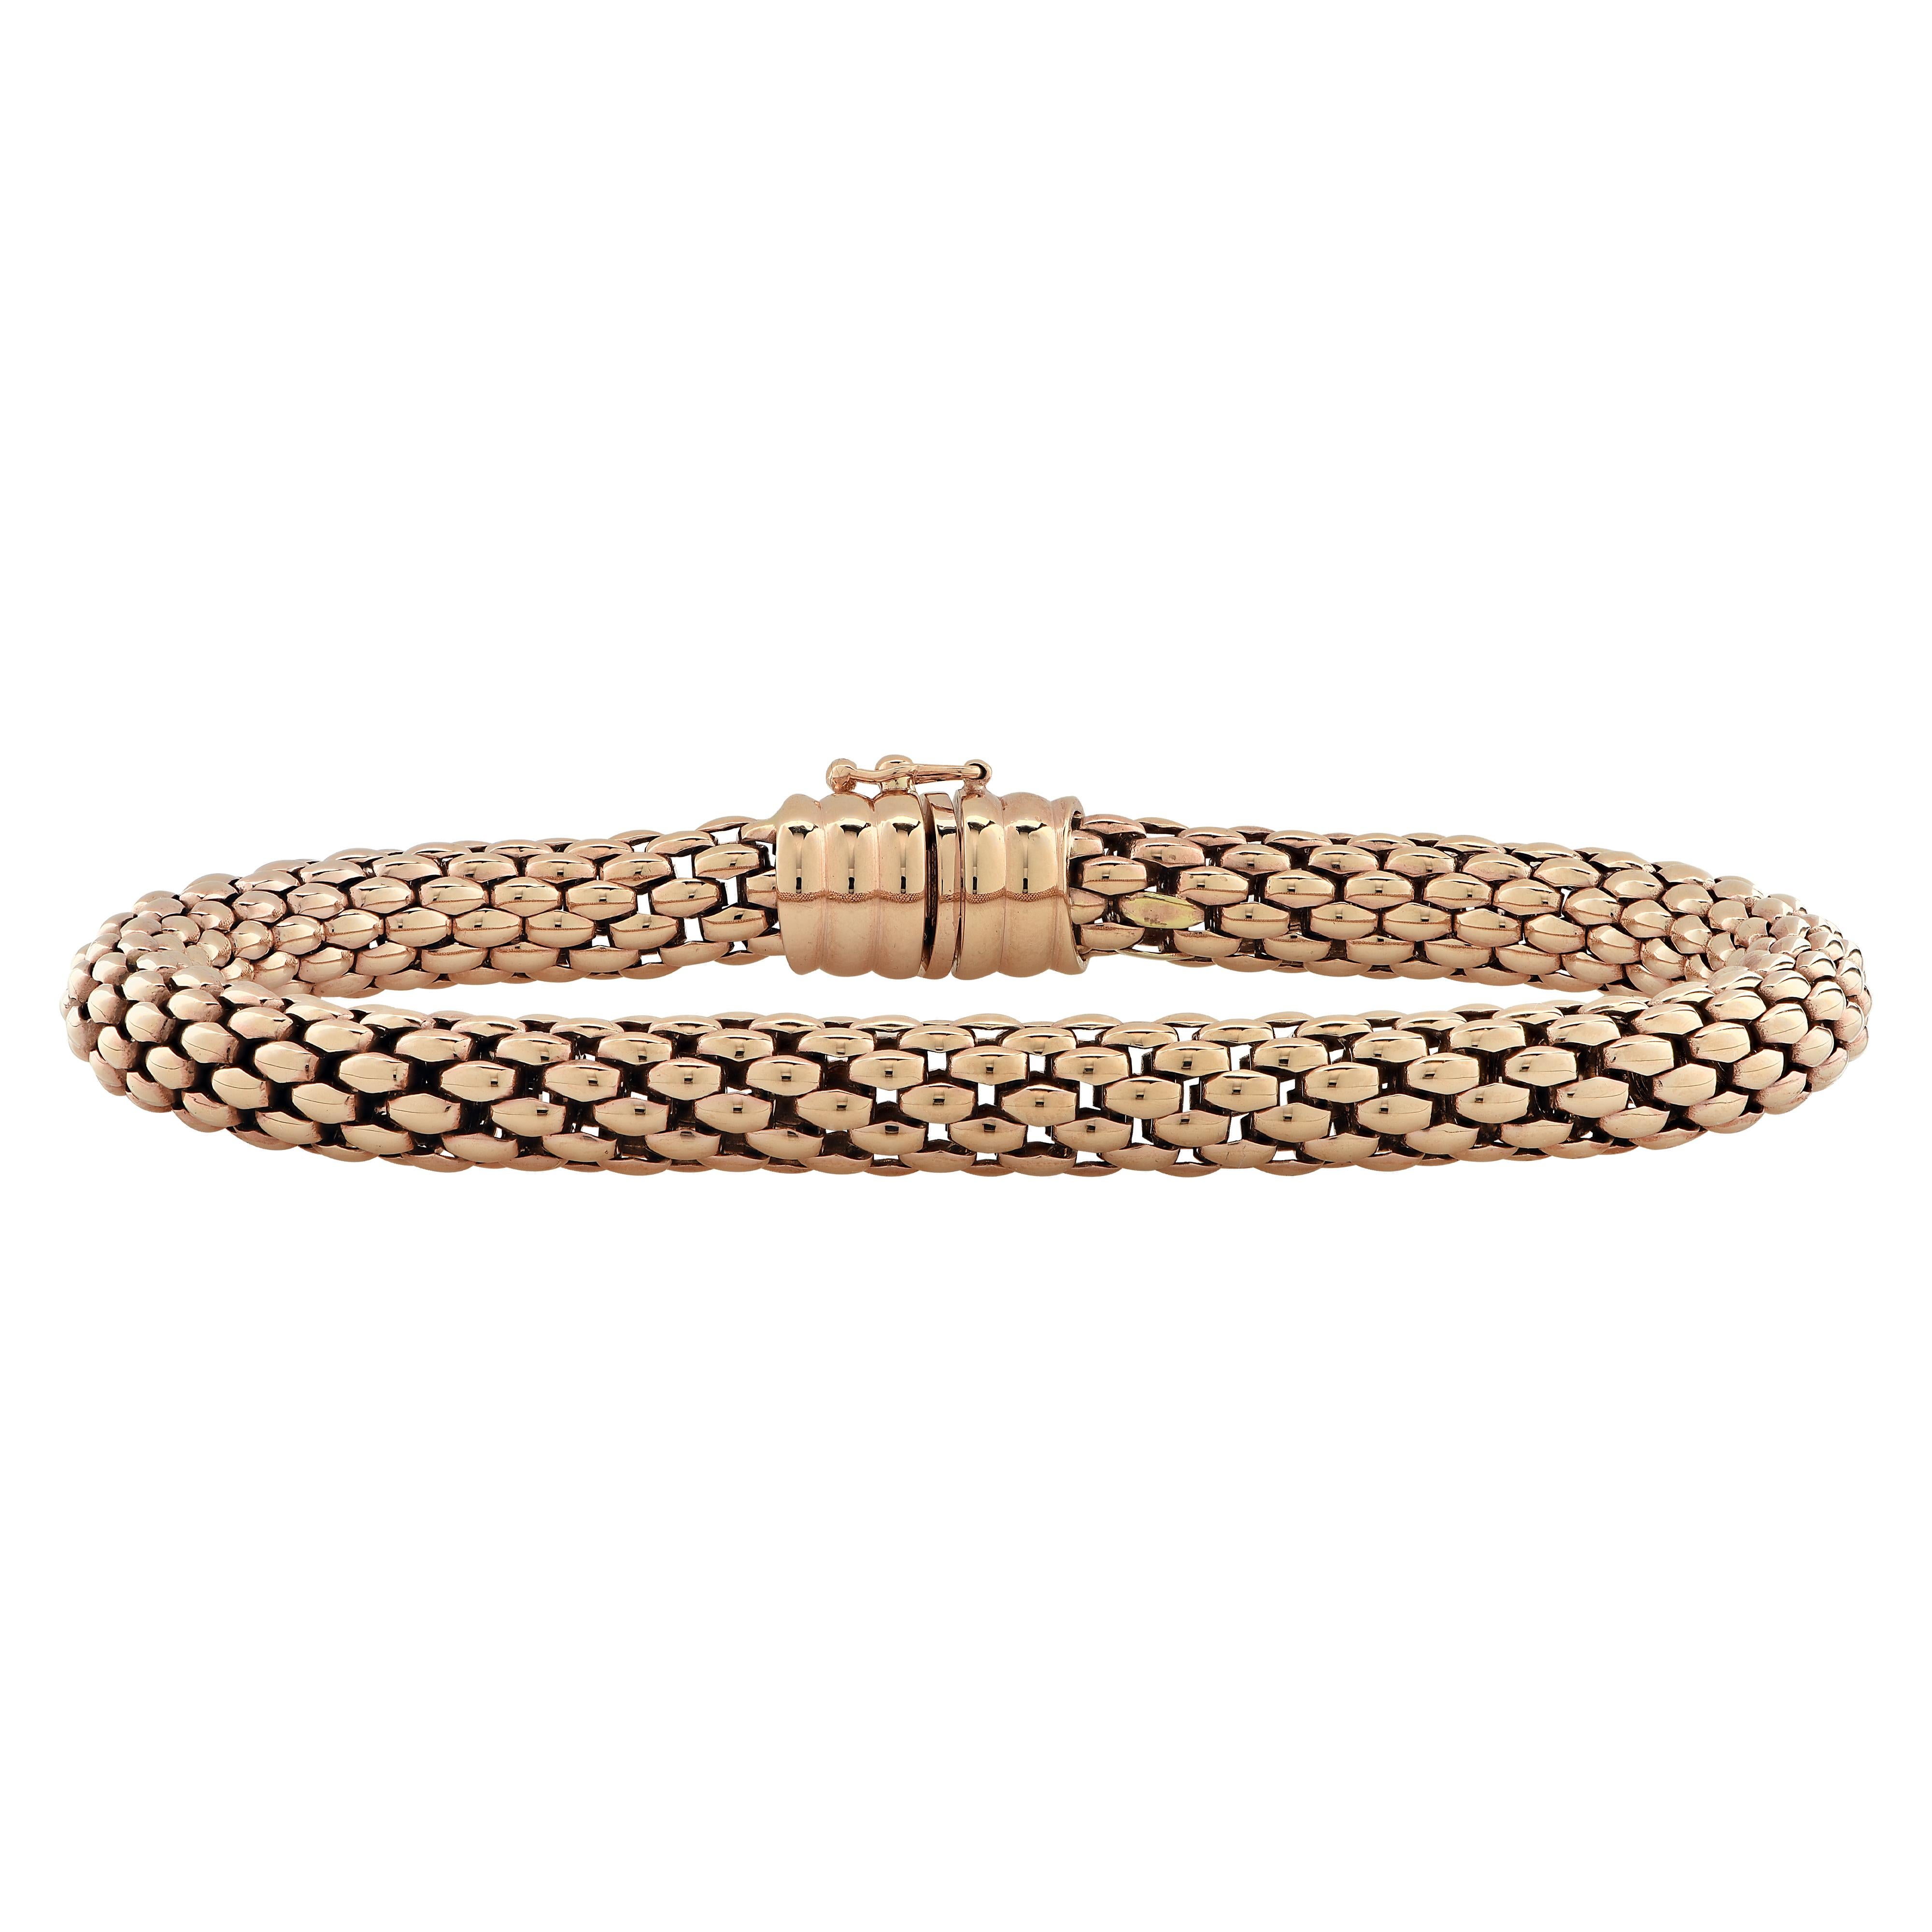 Fope Flex ‘it bracelet crafted by hand in Italy in 18 karat rose gold with white gold details. This stunning woven rose gold flexible tube bracelet detailed with rose gold rondelles glides around the wrist wrapping it in luxury and sophistication